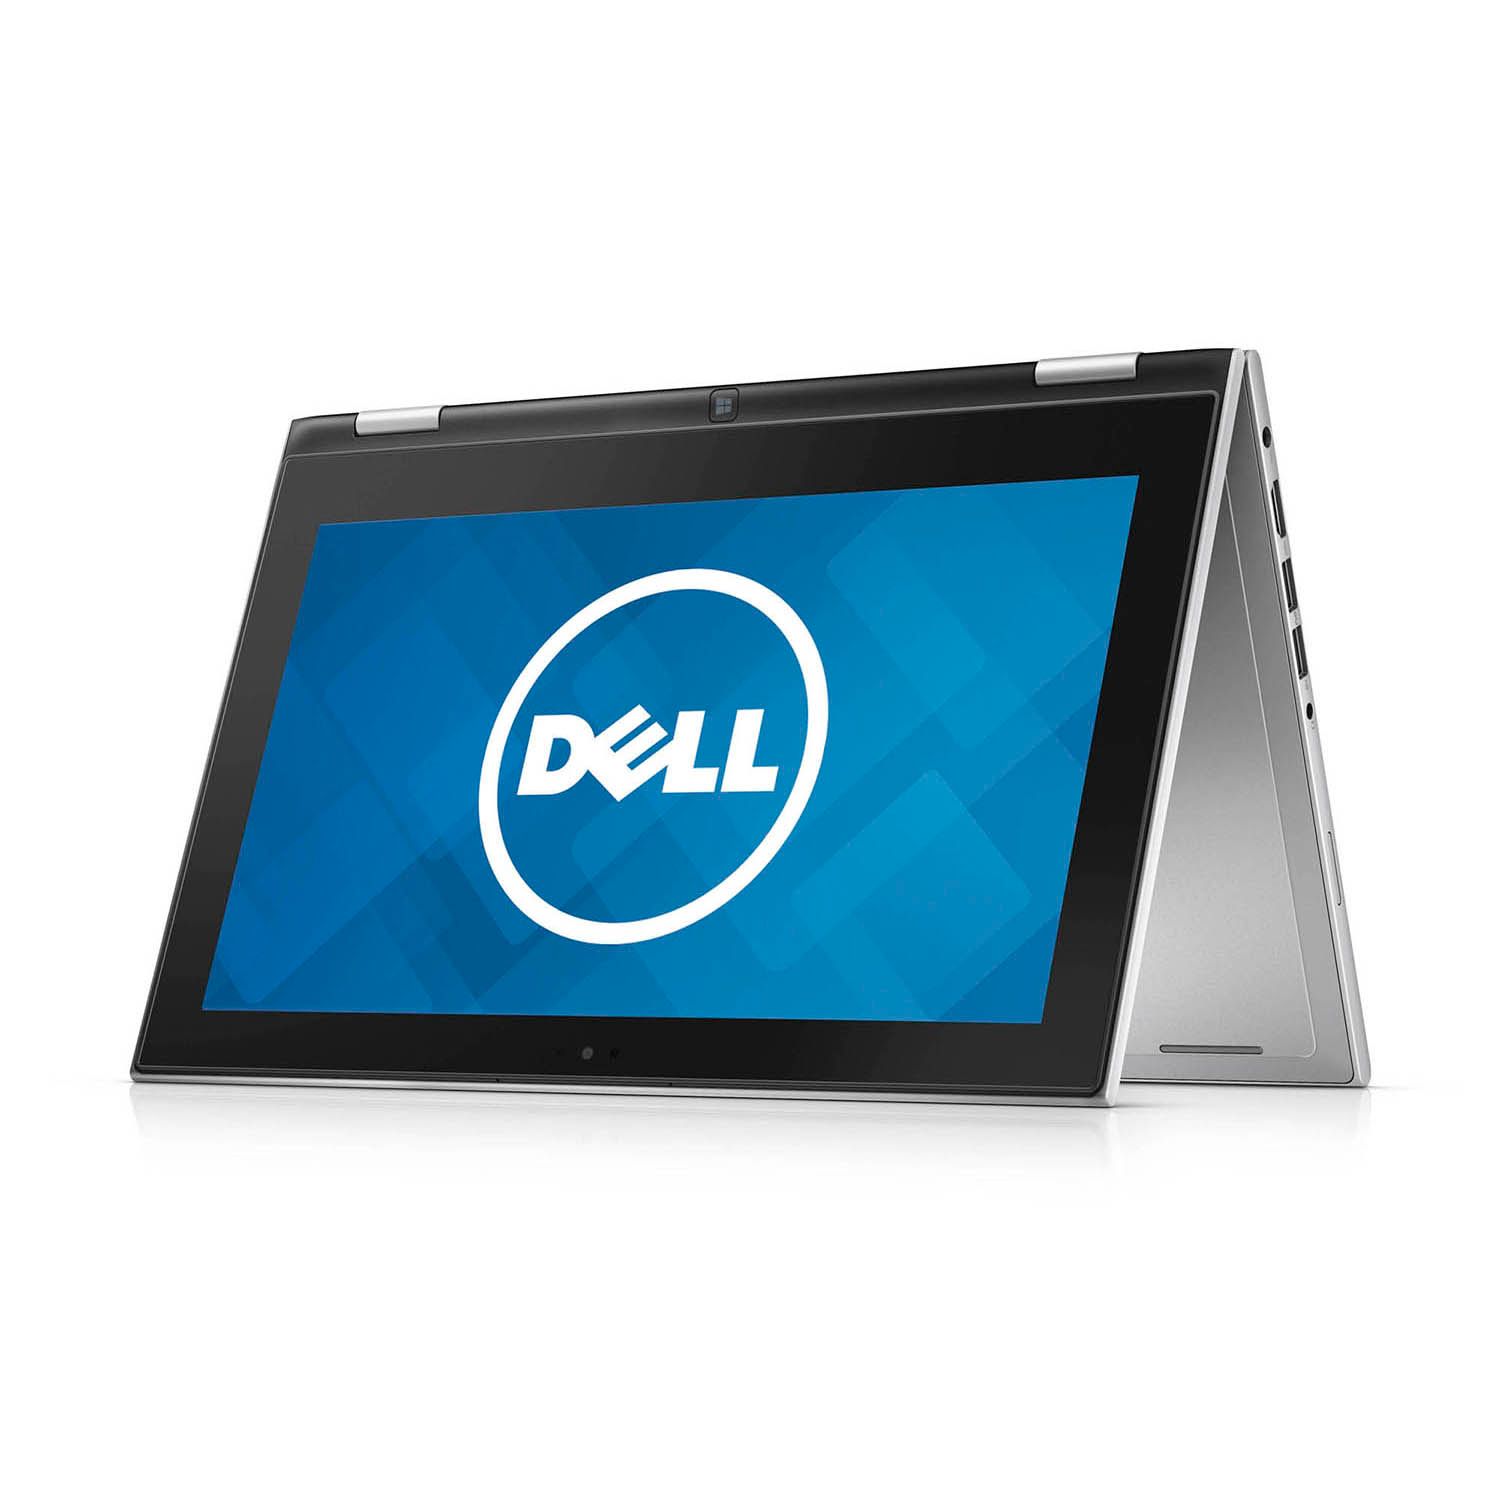 Dell Inspiron 3000 I3148-8840SLV 11.6 inch 4GB 2-in-1 Touchscreen Laptop with Intel i3 Processor, 500GB HDD